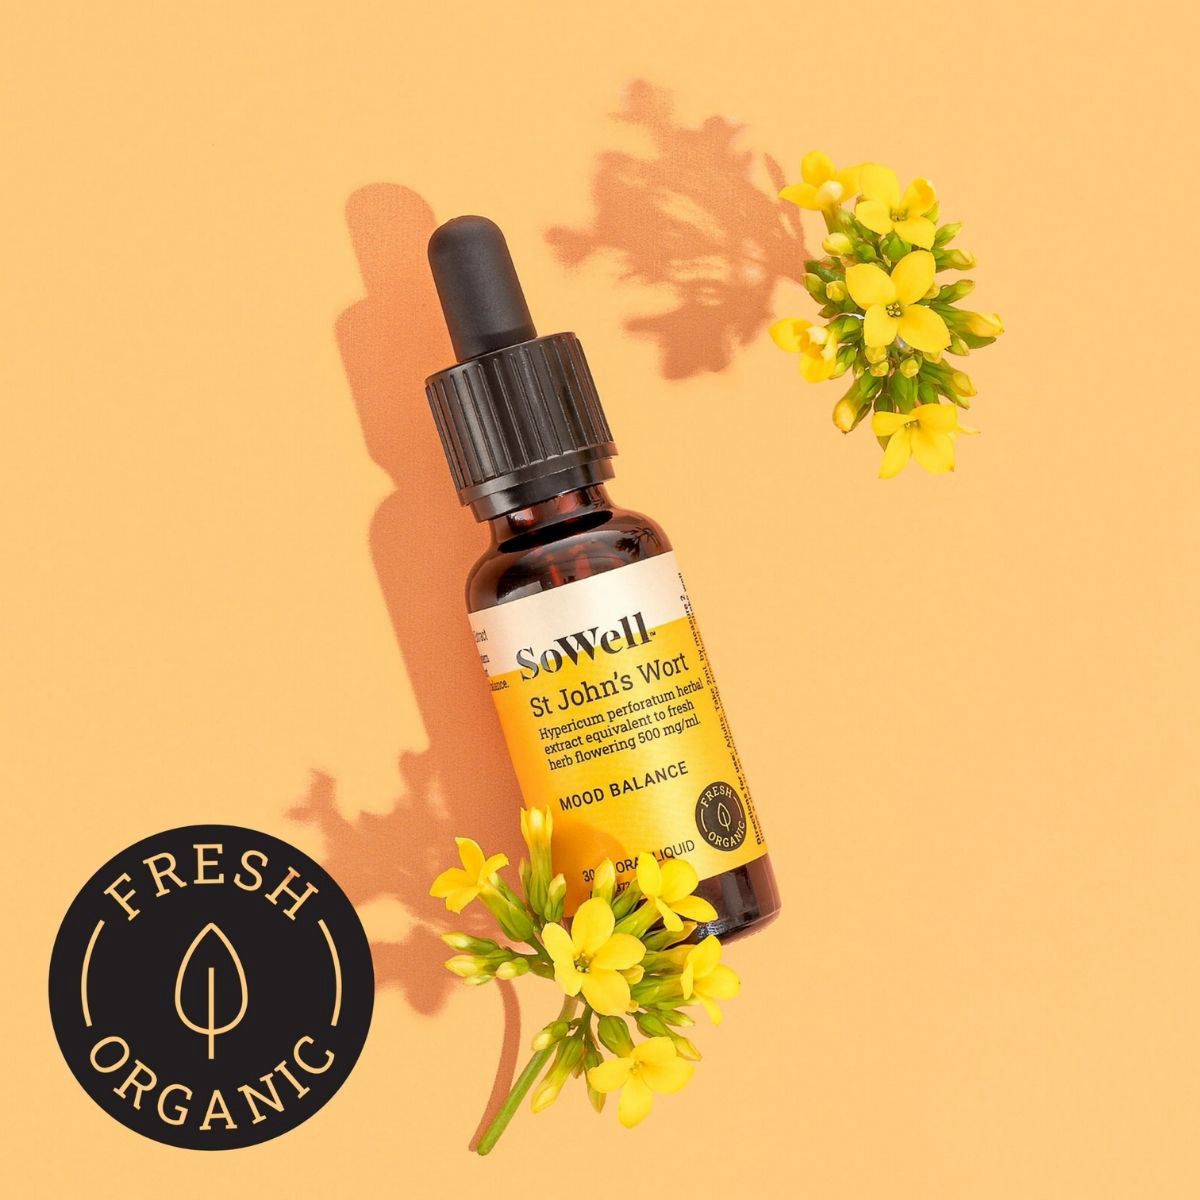 30ml dropper bottle of Sowell St John's Wort tincture on a yellowish background surrounded by flowers